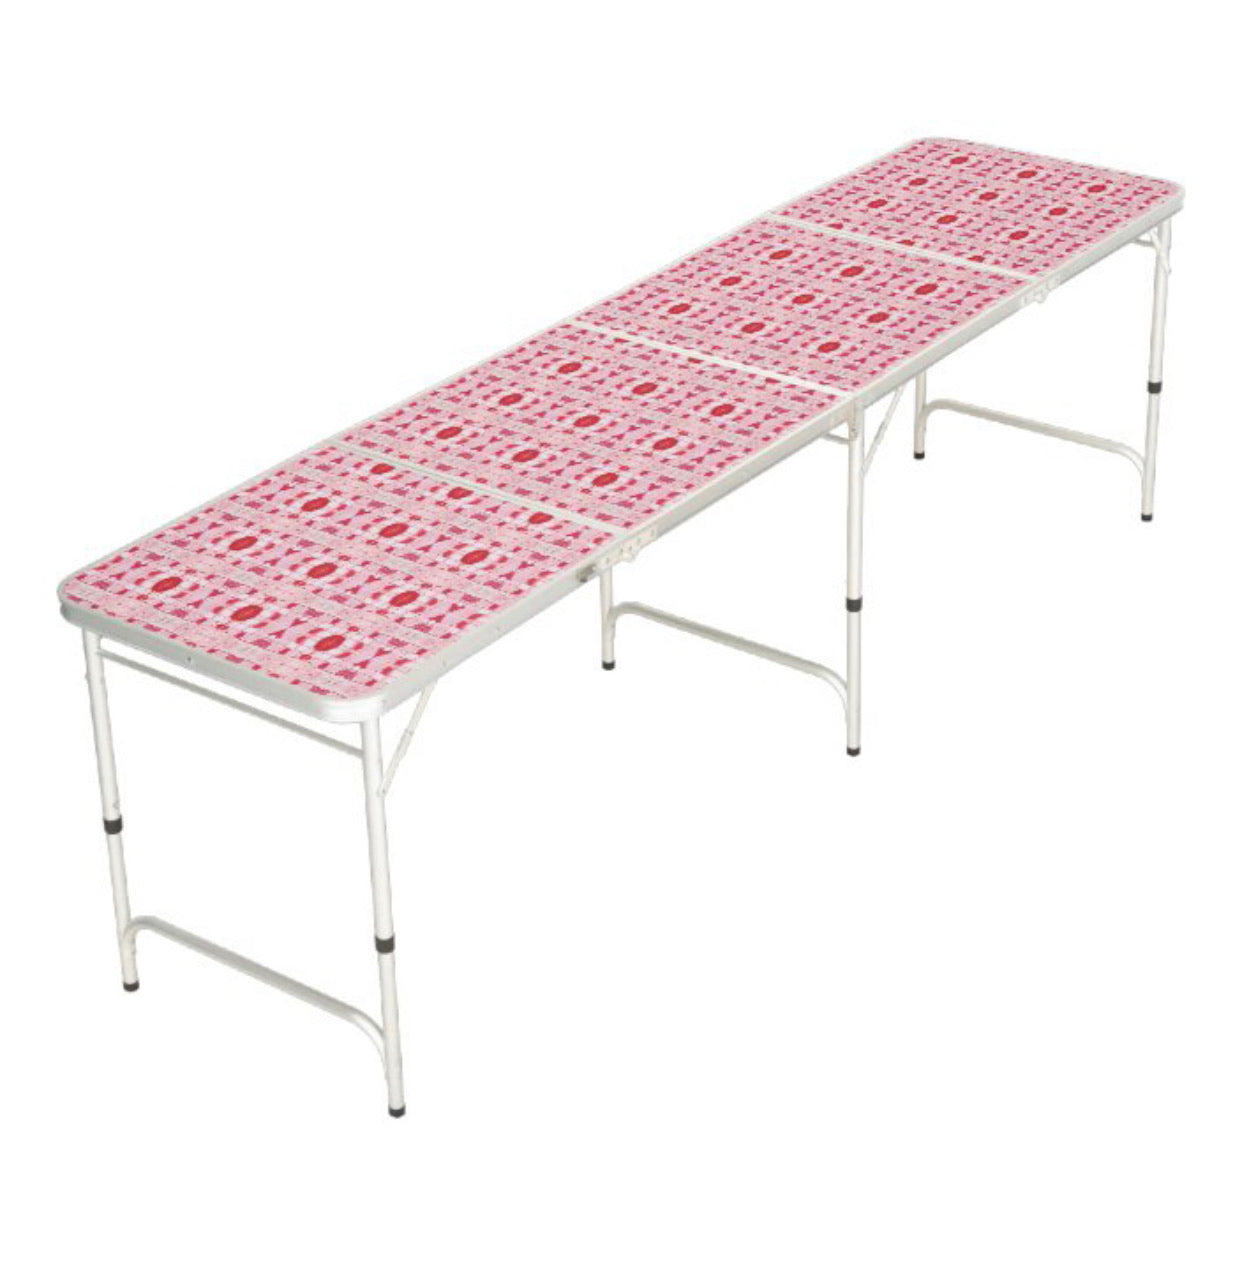 Picnic Party Table